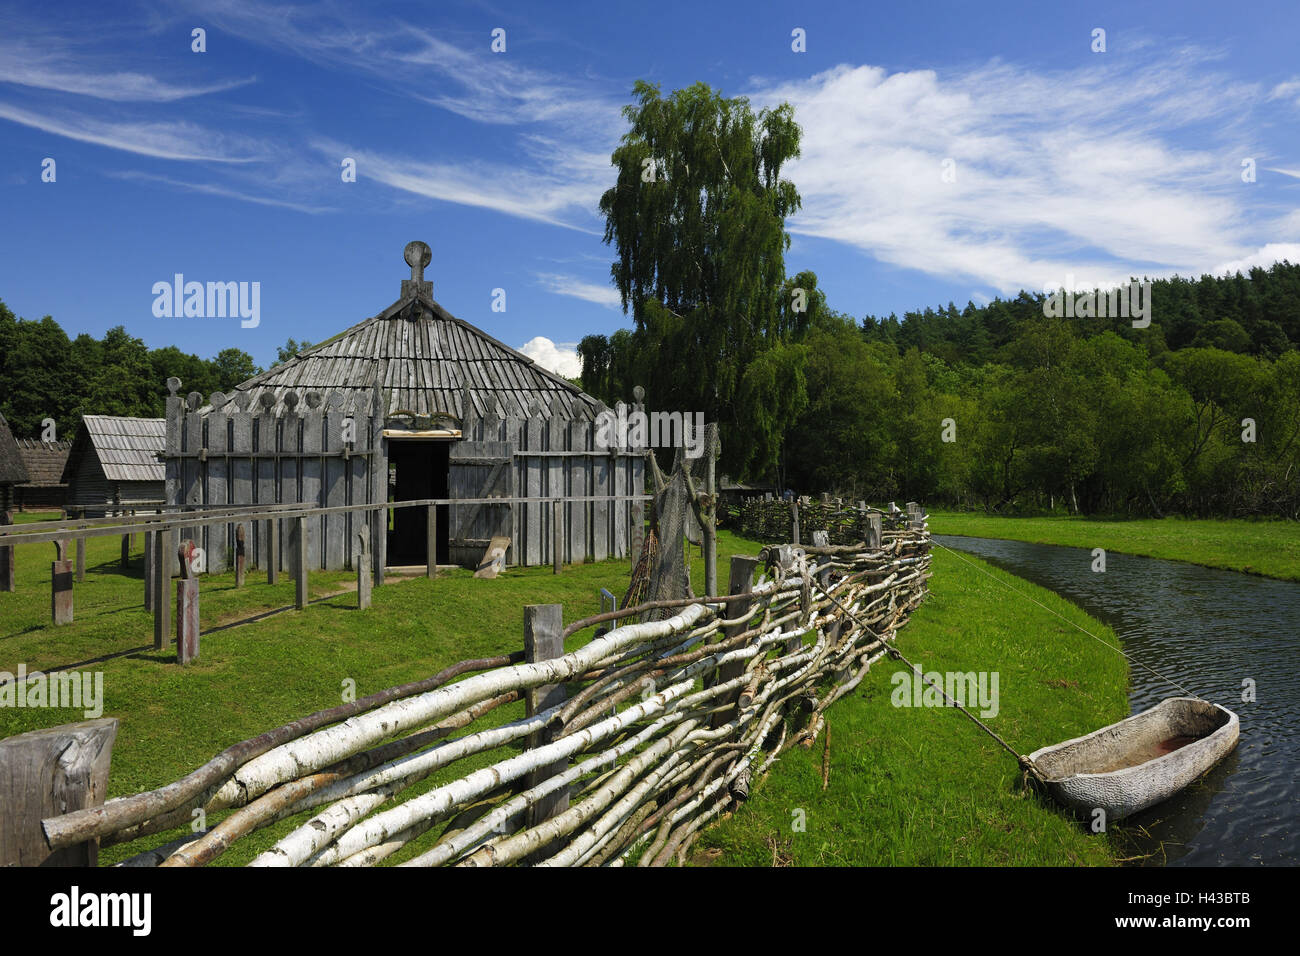 Germany, Mecklenburg-West Pomerania, Groß Raden, open-air museum, wooden house, boat, no property release, Stock Photo